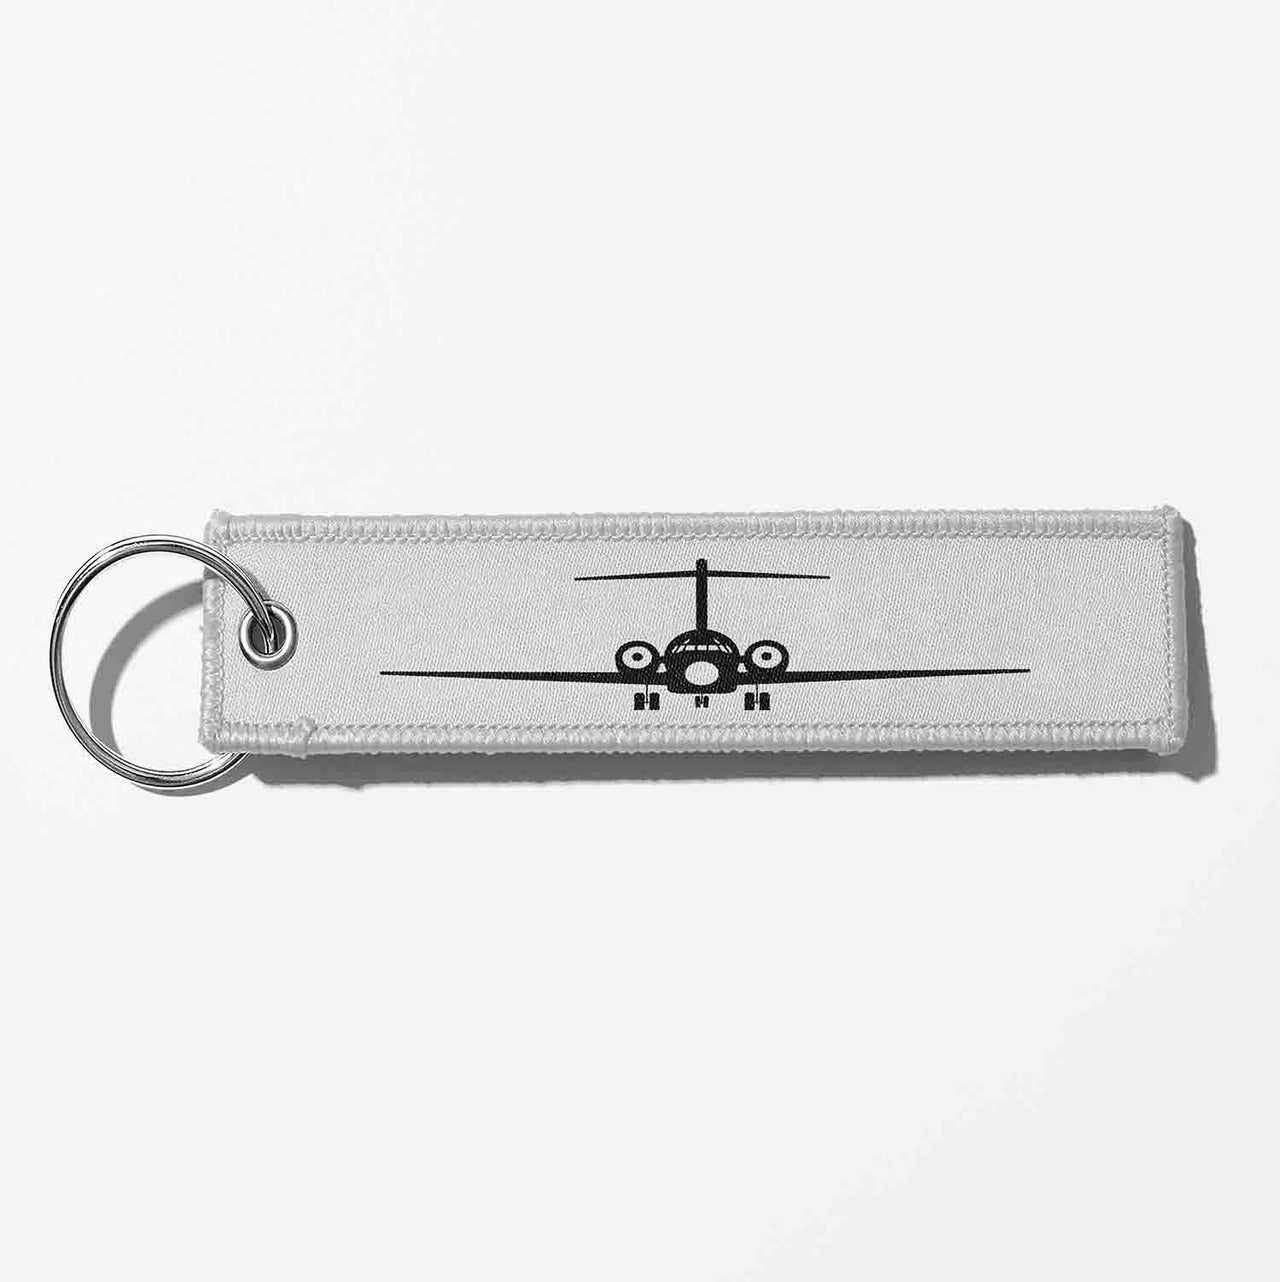 Boeing 717 Silhouette Designed Key Chains